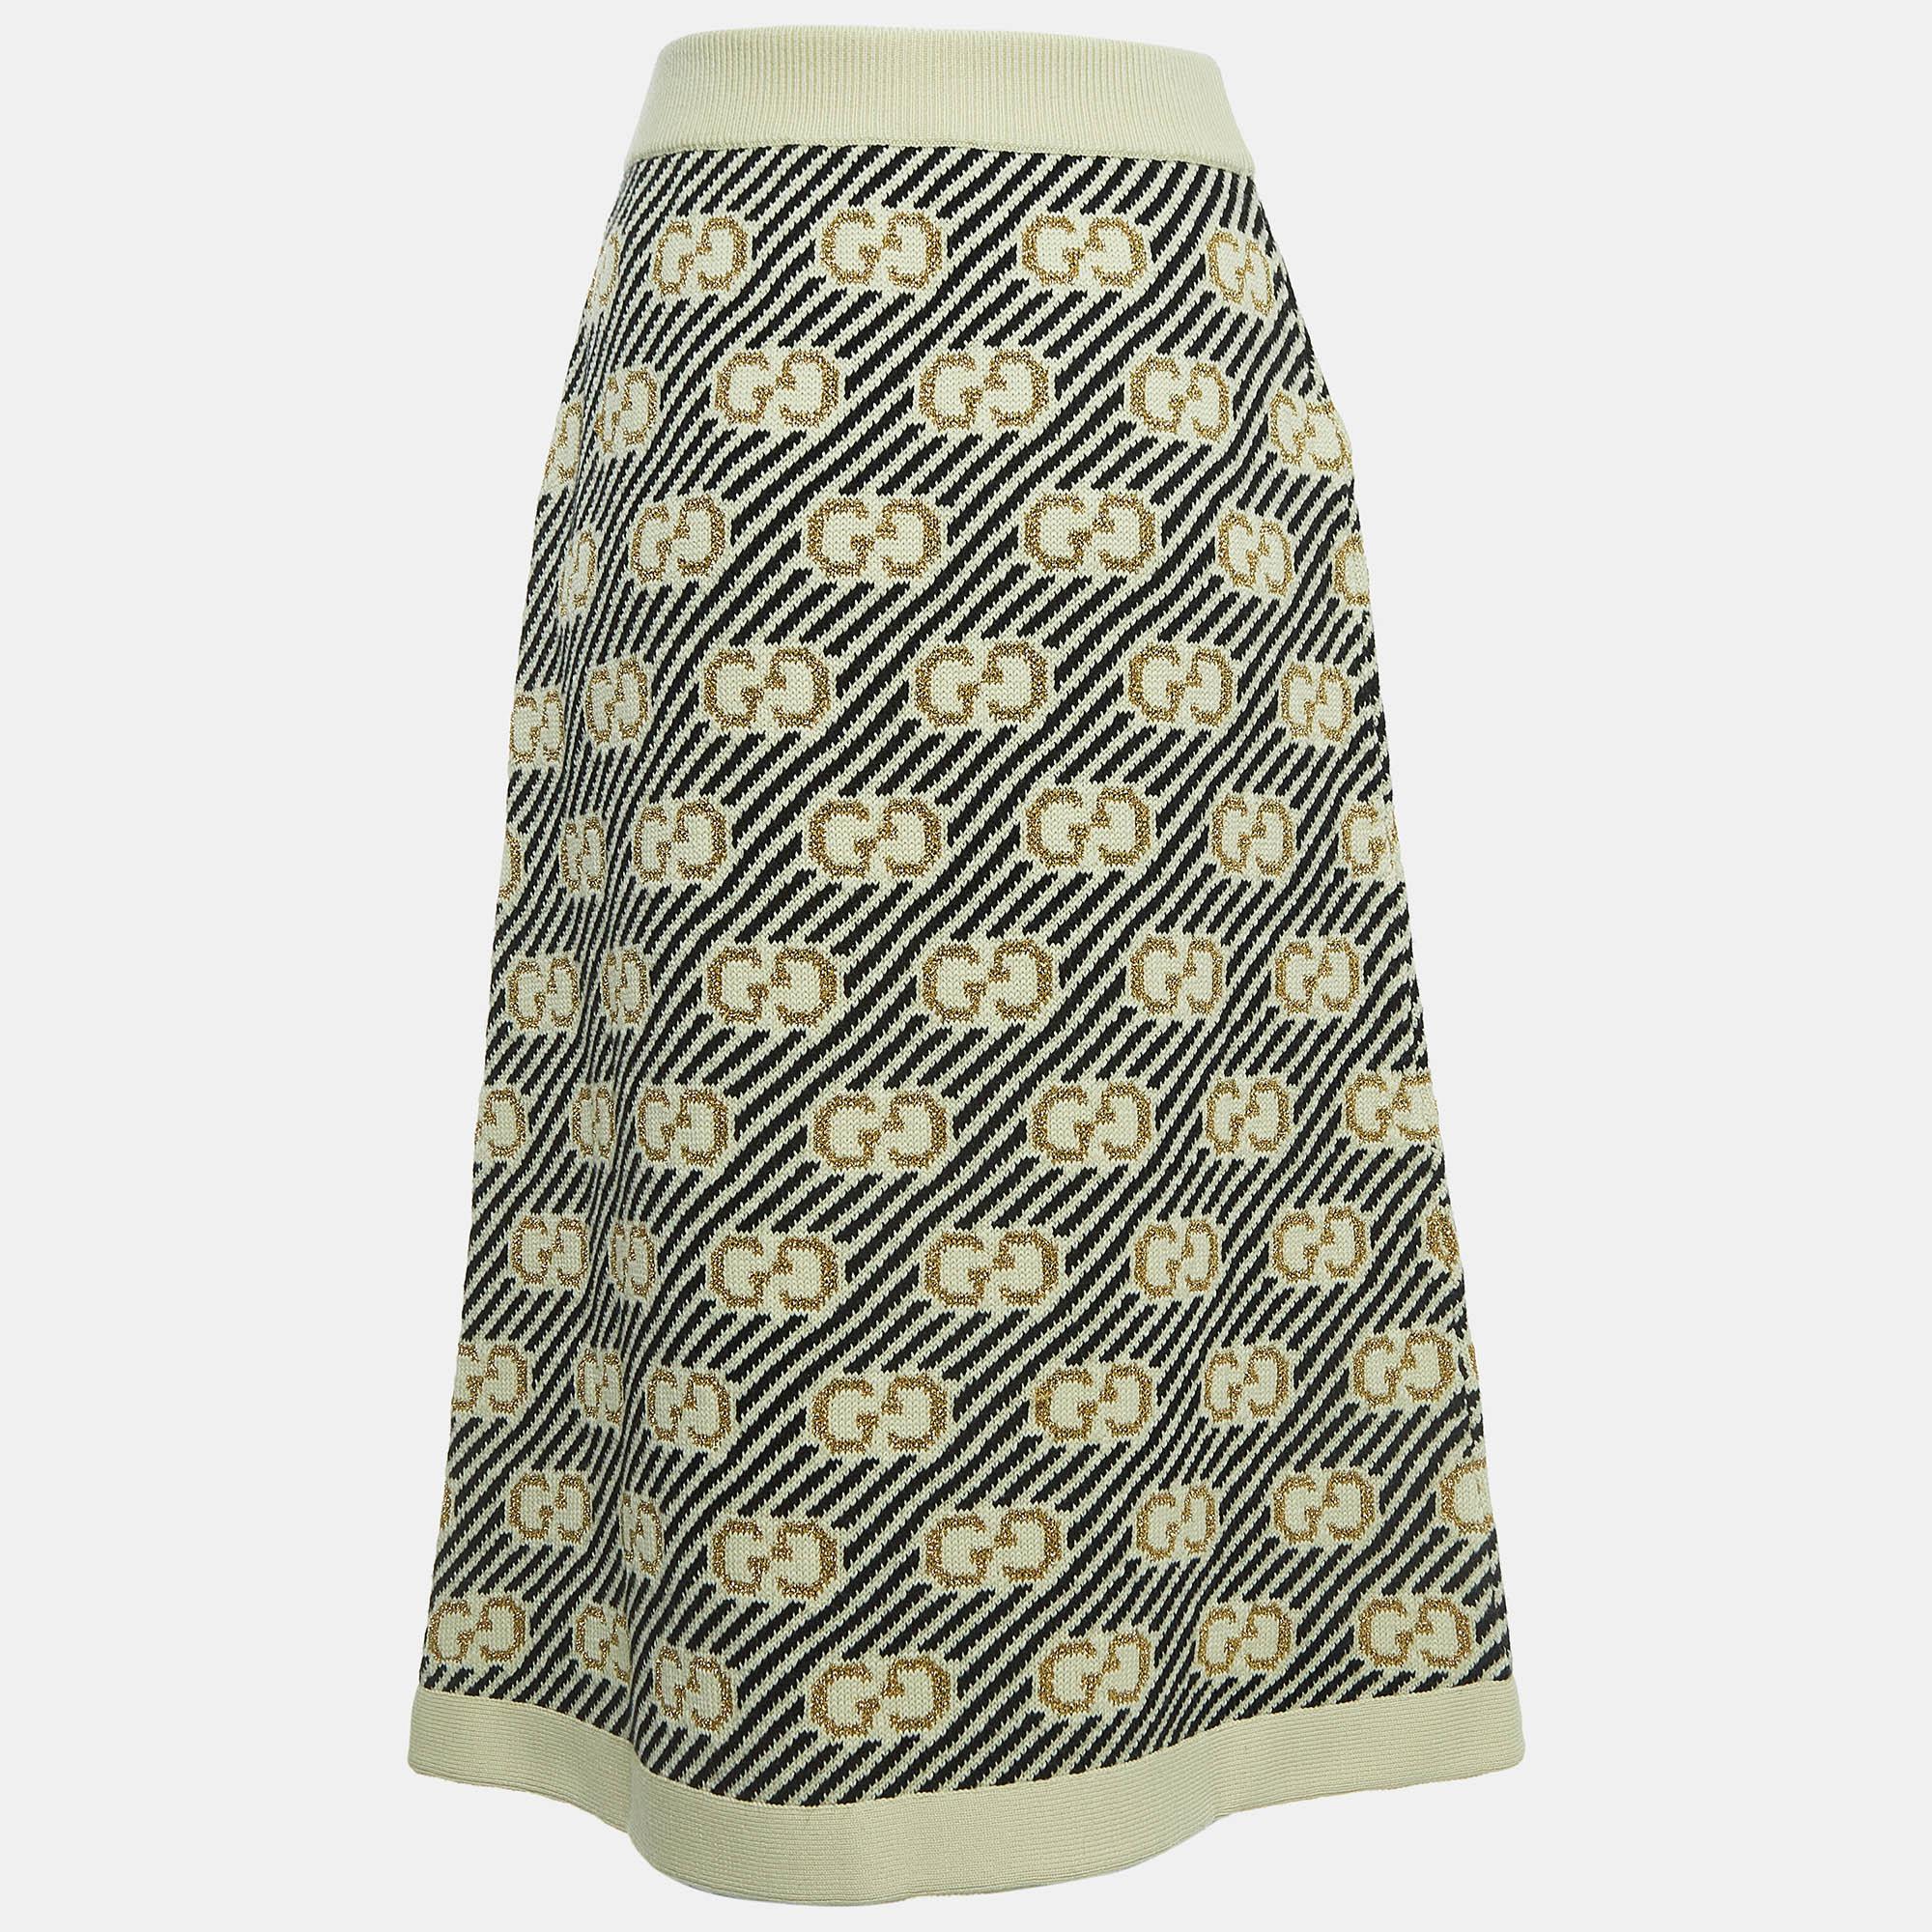 This lovely skirt is beautifully stitched from fine fabric. The comfy designer skirt has a flattering silhouette. Pair it with a simple top and strappy heels for a chic look.

Includes: Gucci Hanger, Gucci Plastic Zip Bag, Shopping Bag